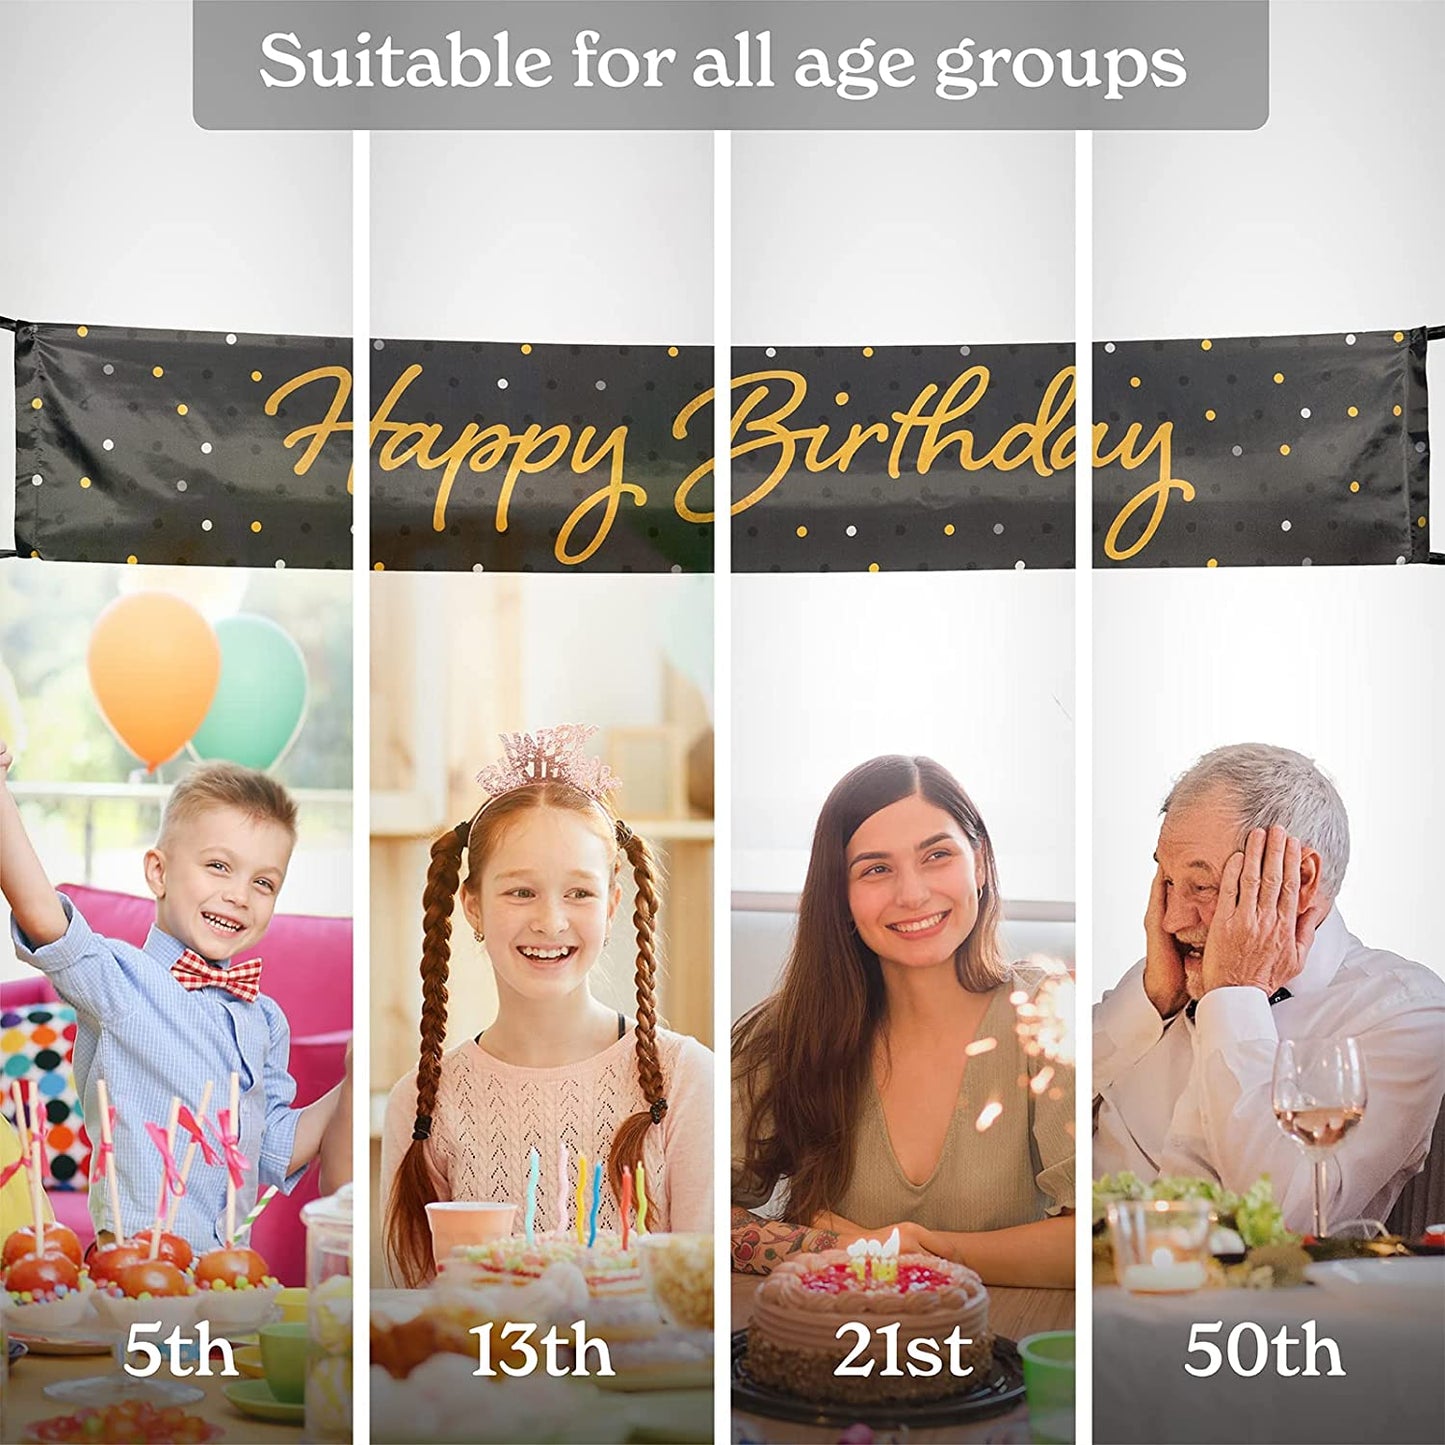 Happy Birthday Yard Sign Banner, 117 x 19 Inch, Black/Gold, Outdoor Birthday Decorations for Lawn, Fence and Trees, Durable Polyester Cloth Material